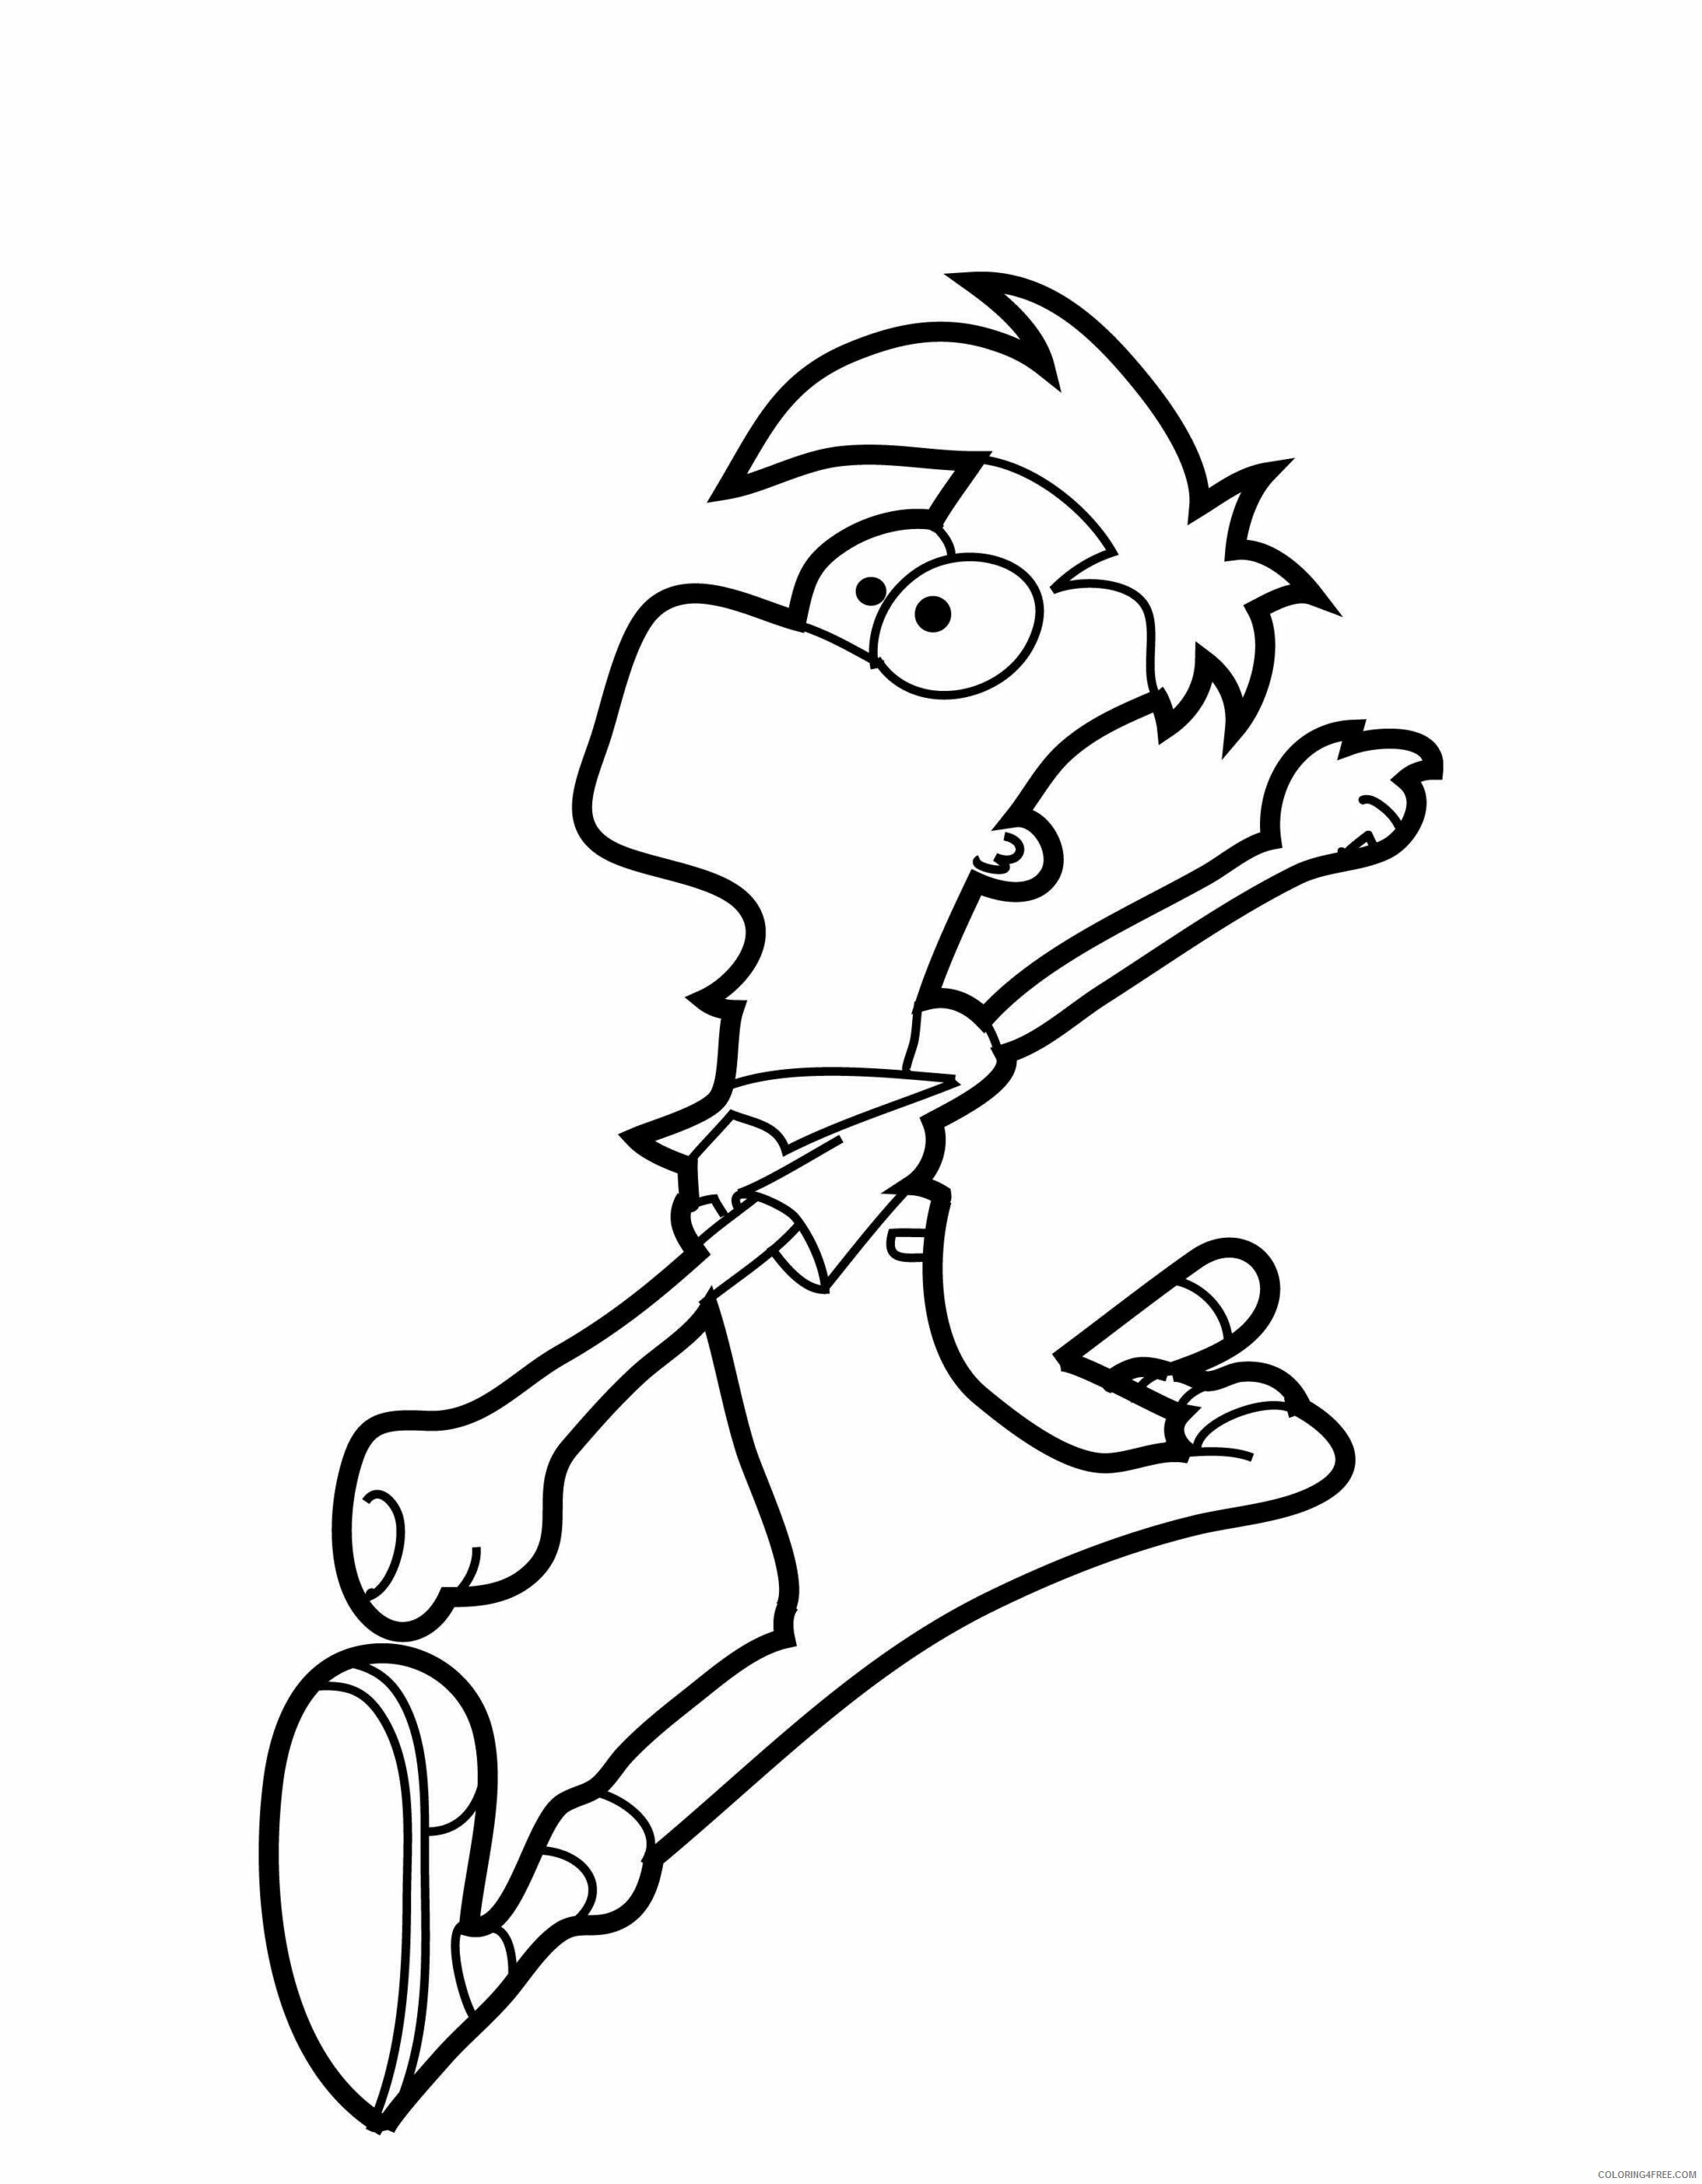 Phineas and Ferb Coloring Pages TV Film Images Printable 2020 06209 Coloring4free